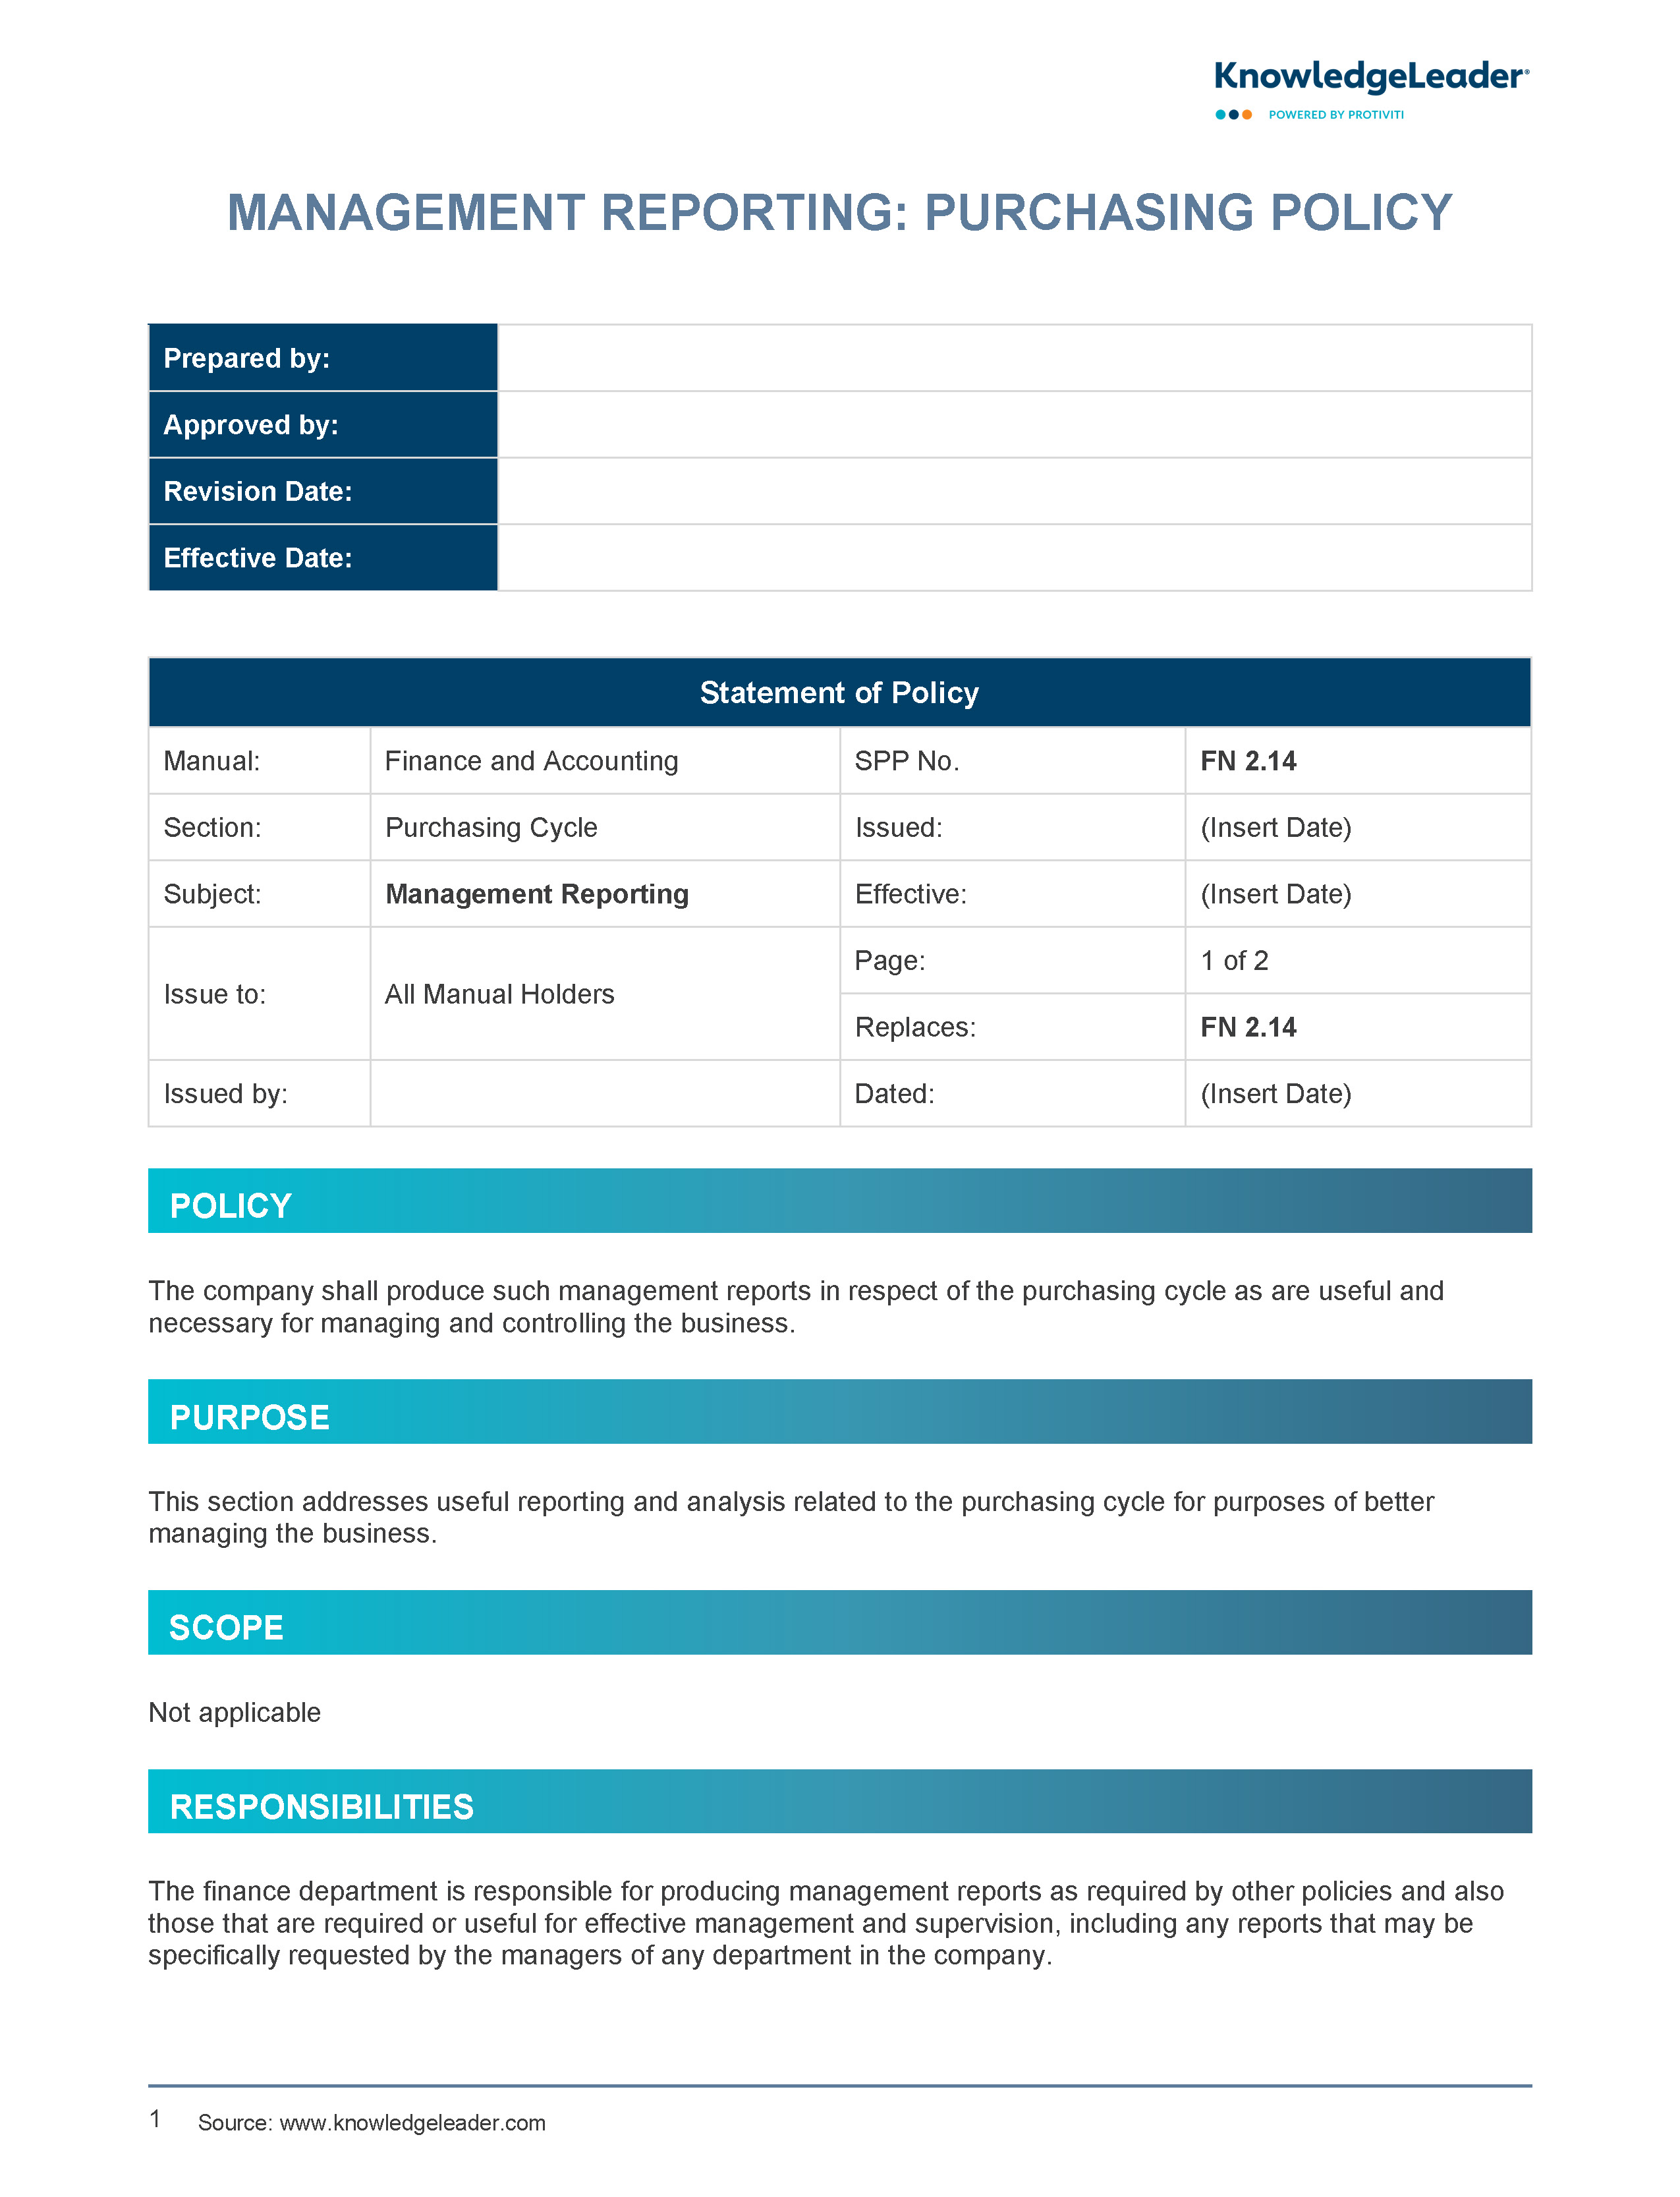 Screenshot of the first page of Management Reporting: Purchasing Policy